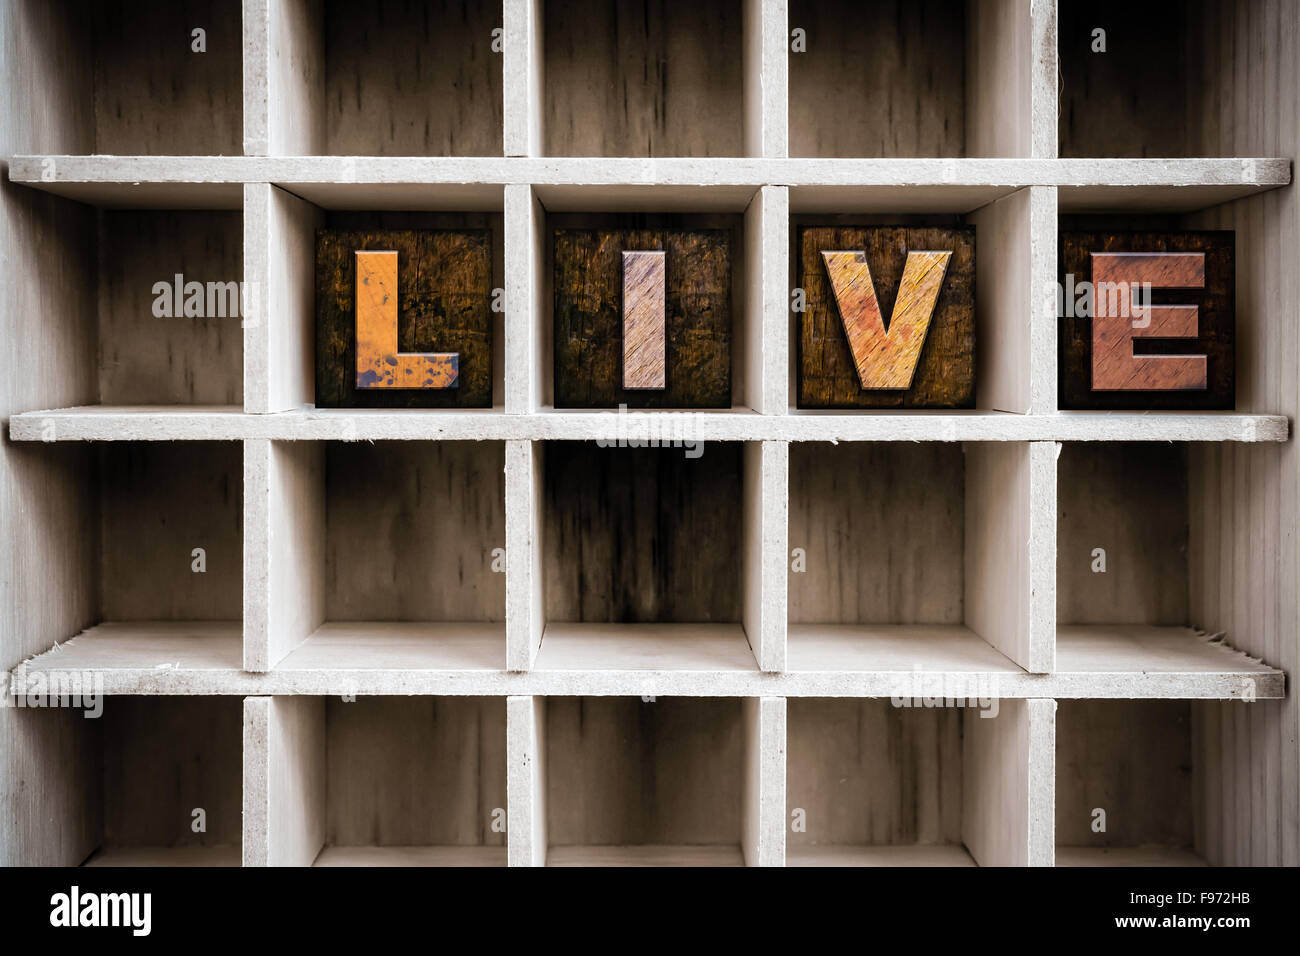 The word 'LIVE' written in vintage ink stained wooden letterpress type in a partitioned printer's drawer. Stock Photo